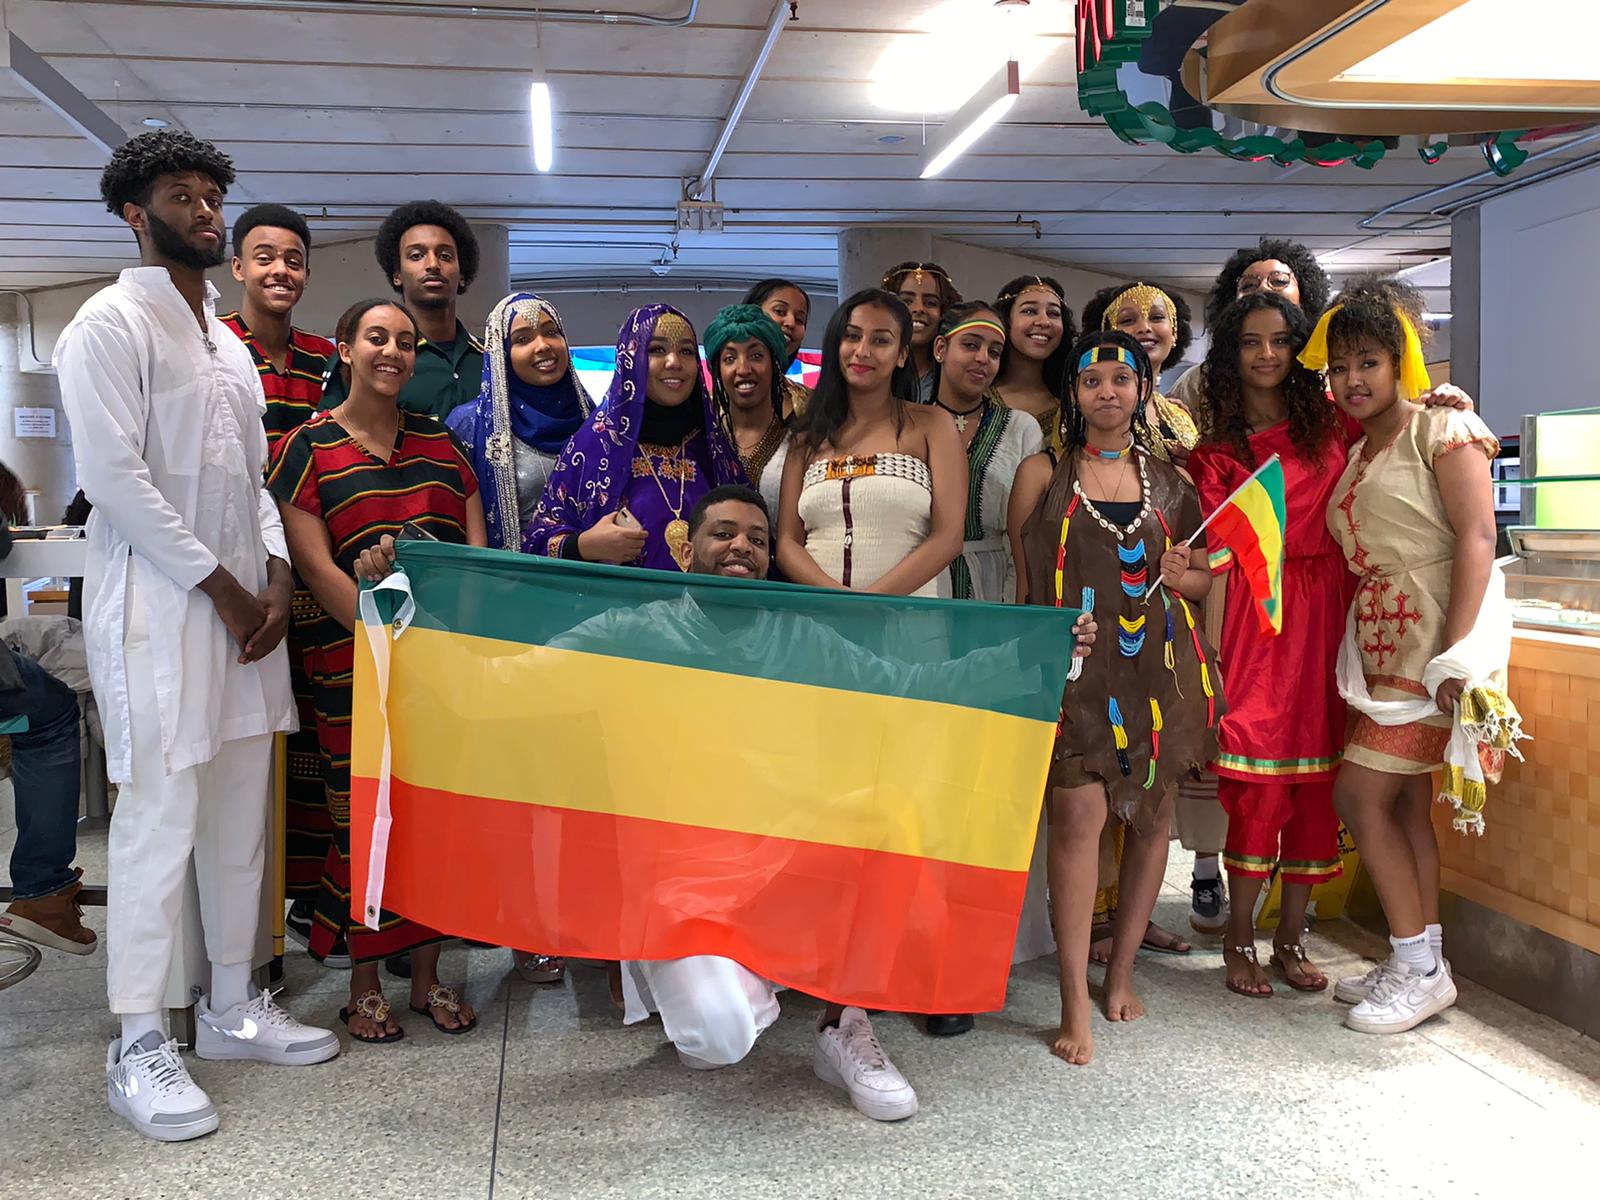 A group of students dressed in different Ethiopian fashions